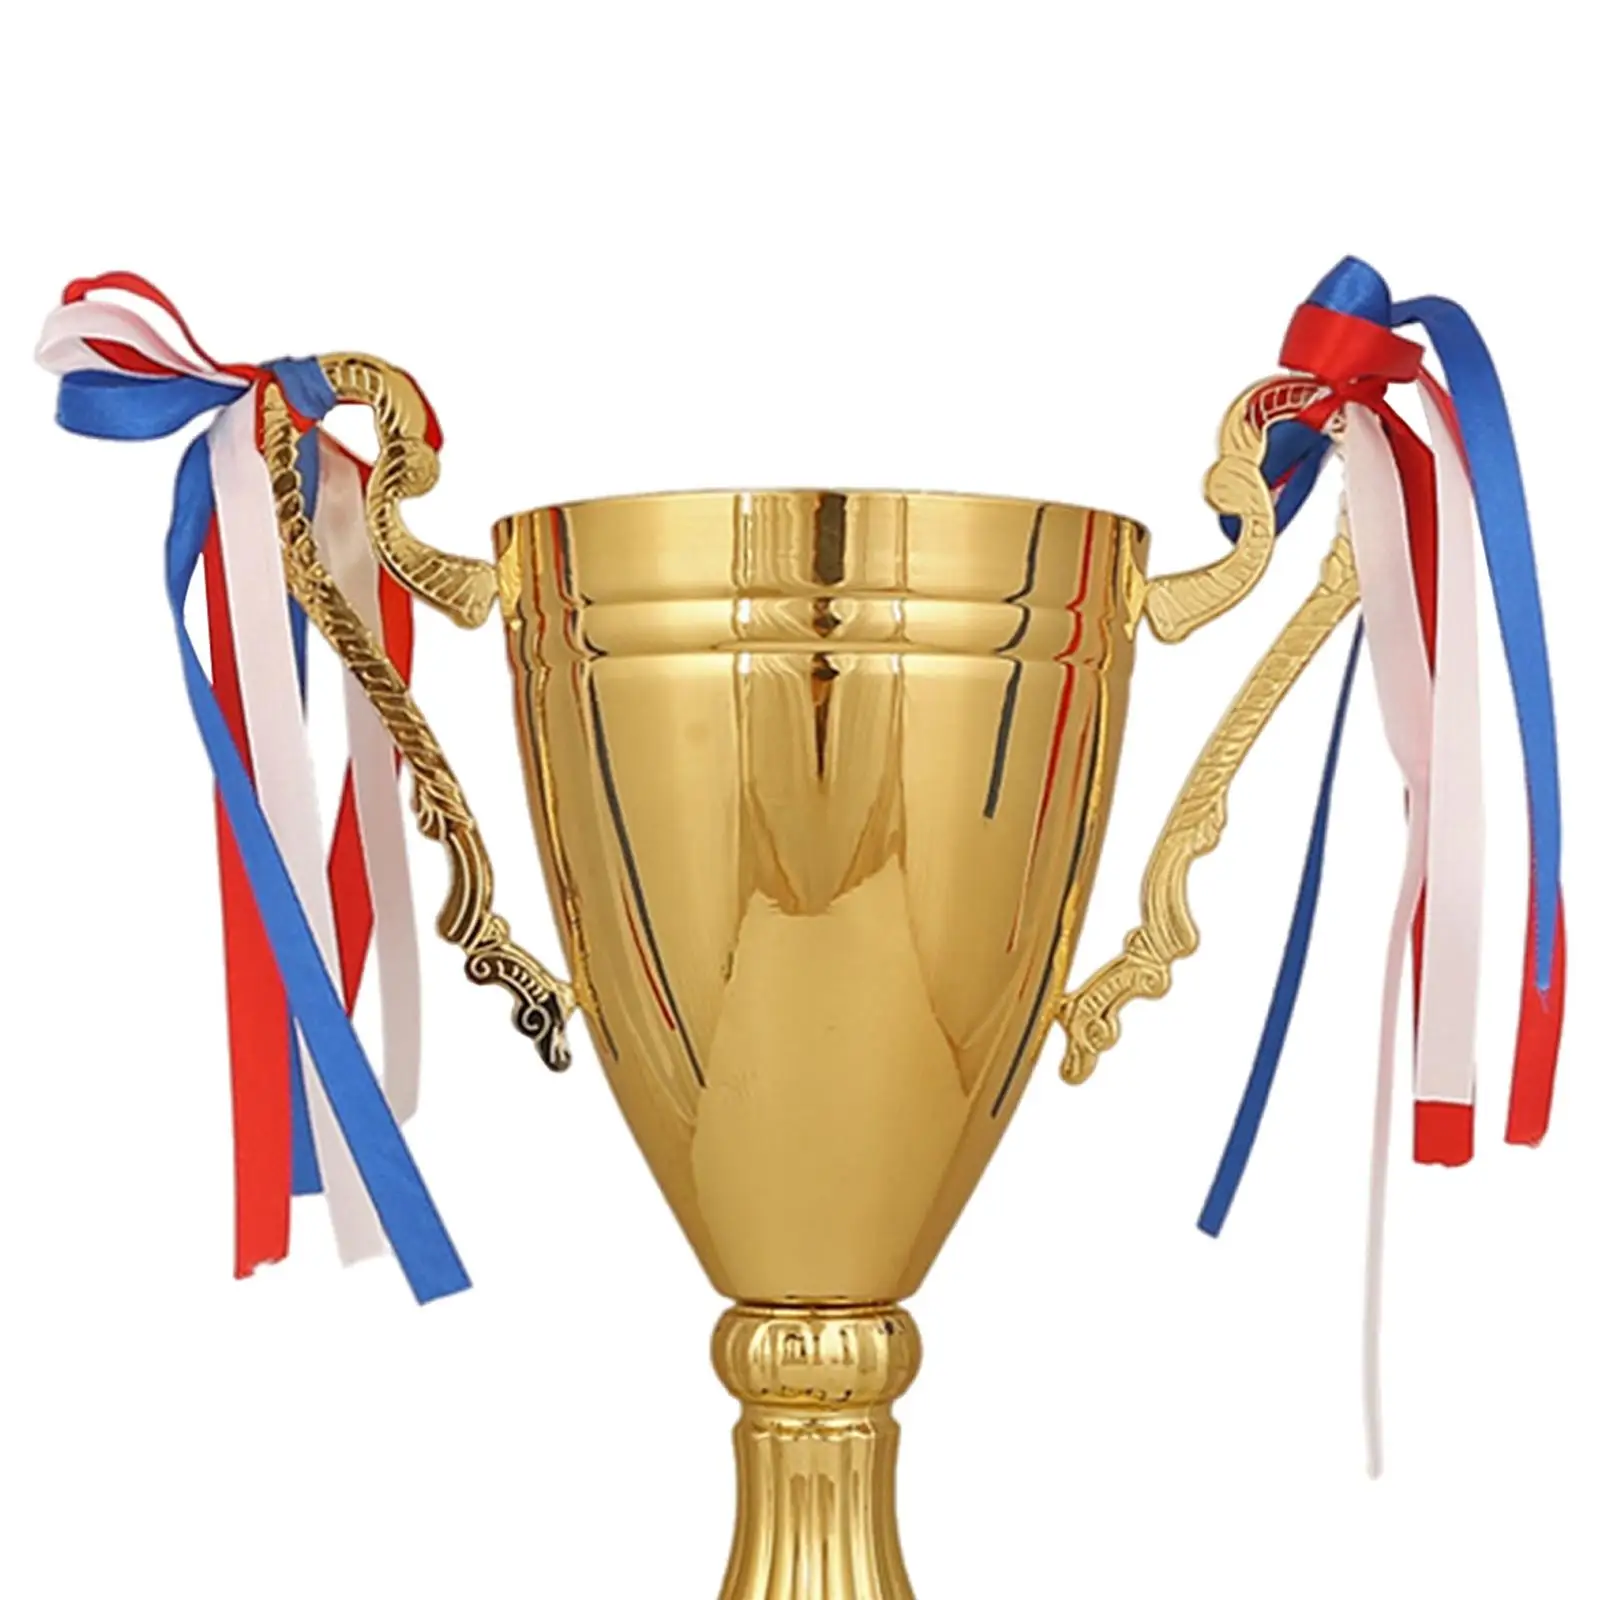 Golden Trophy Cup Large Gold Trophy Cup for Kids Party Football Soccer Sports Championships Teamwork Award Competition Rewarding